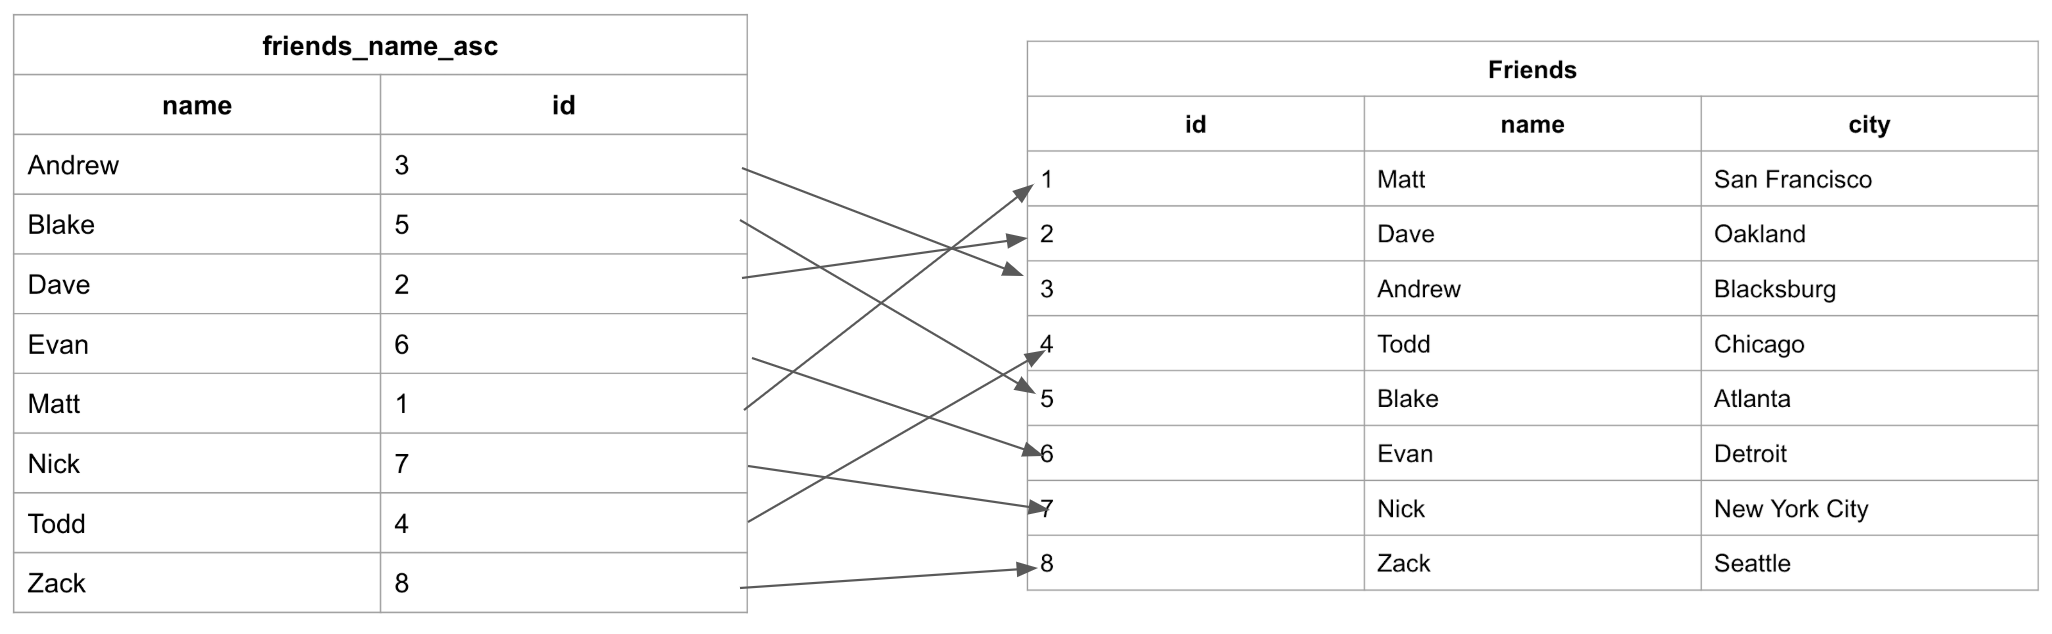 image showing a representation of an index